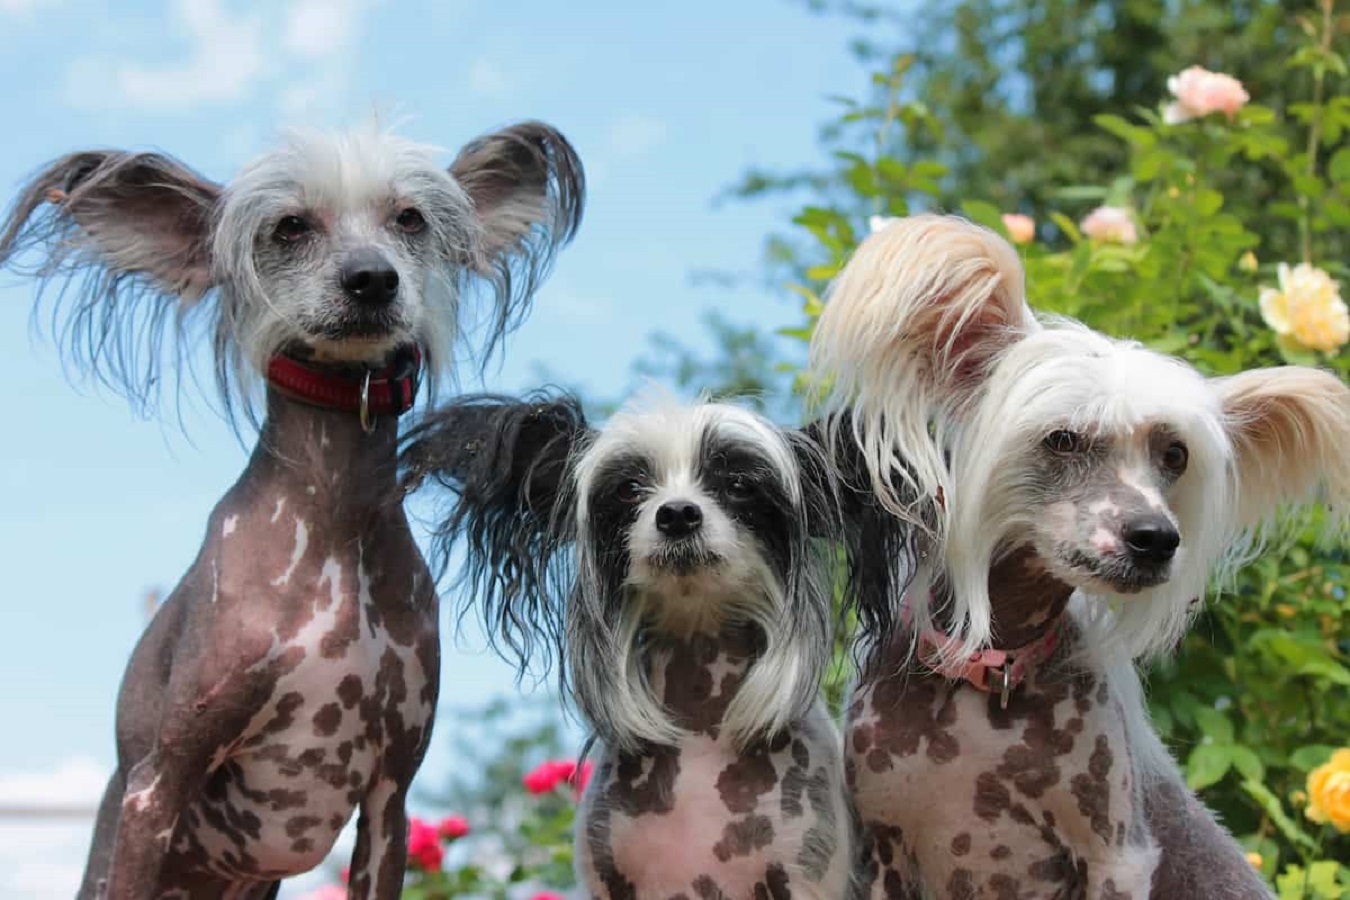 Chinese Crested Dog - Characteristics, Temperament and Care Guide